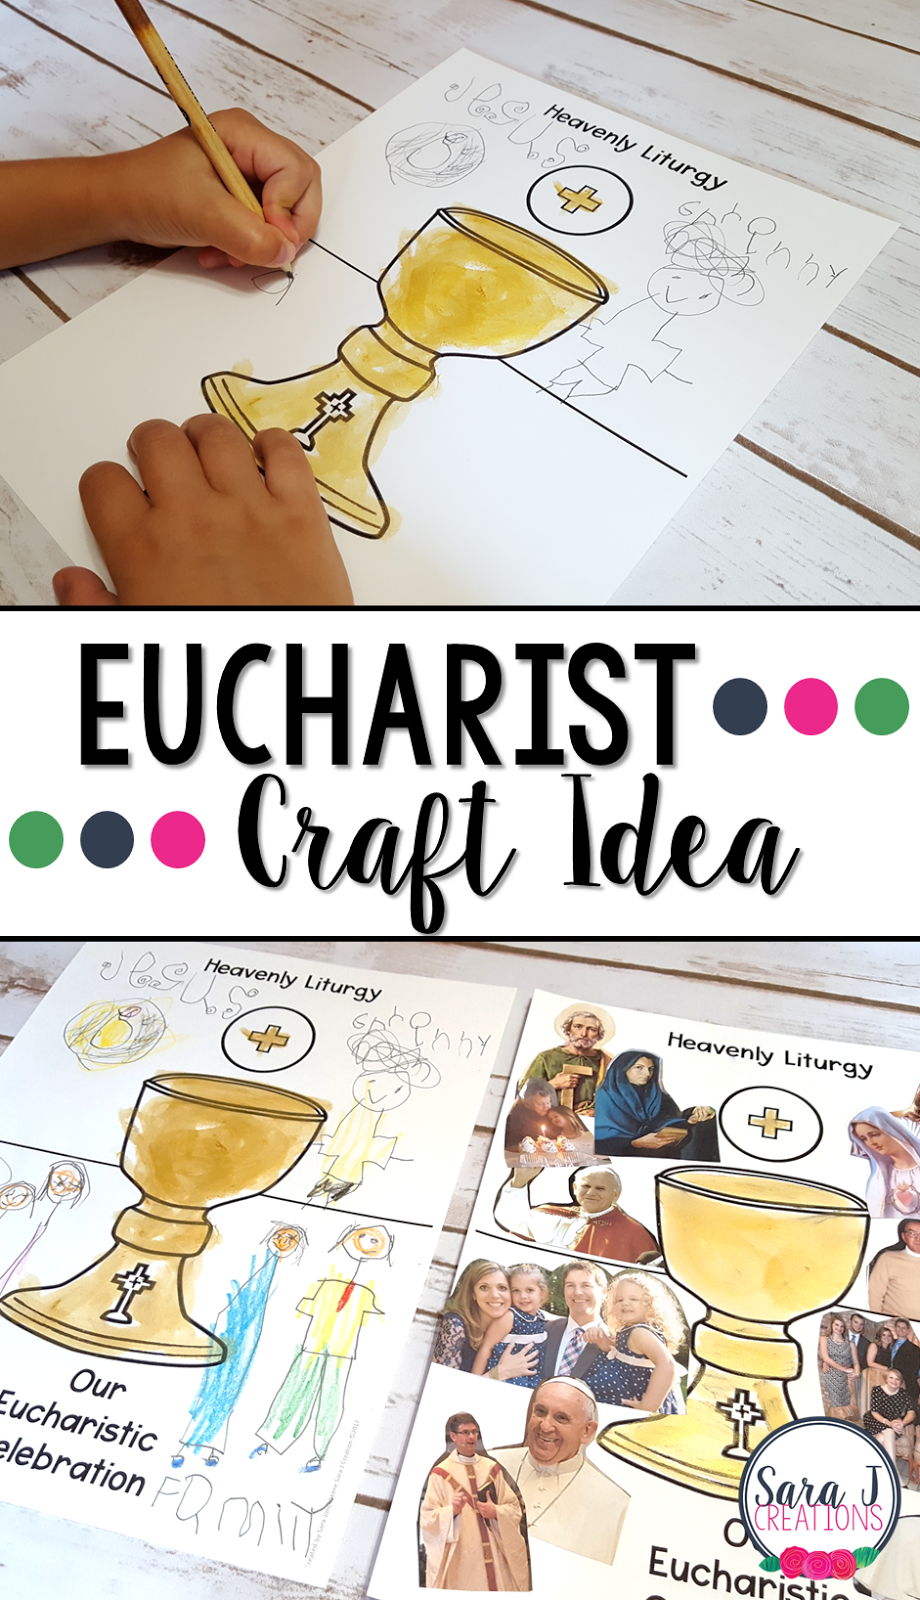 Eucharist craft idea that is perfect for teaching about Holy Communion or the Seven Sacraments. This craft connects our liturgy on earth to the heavenly liturgy. 